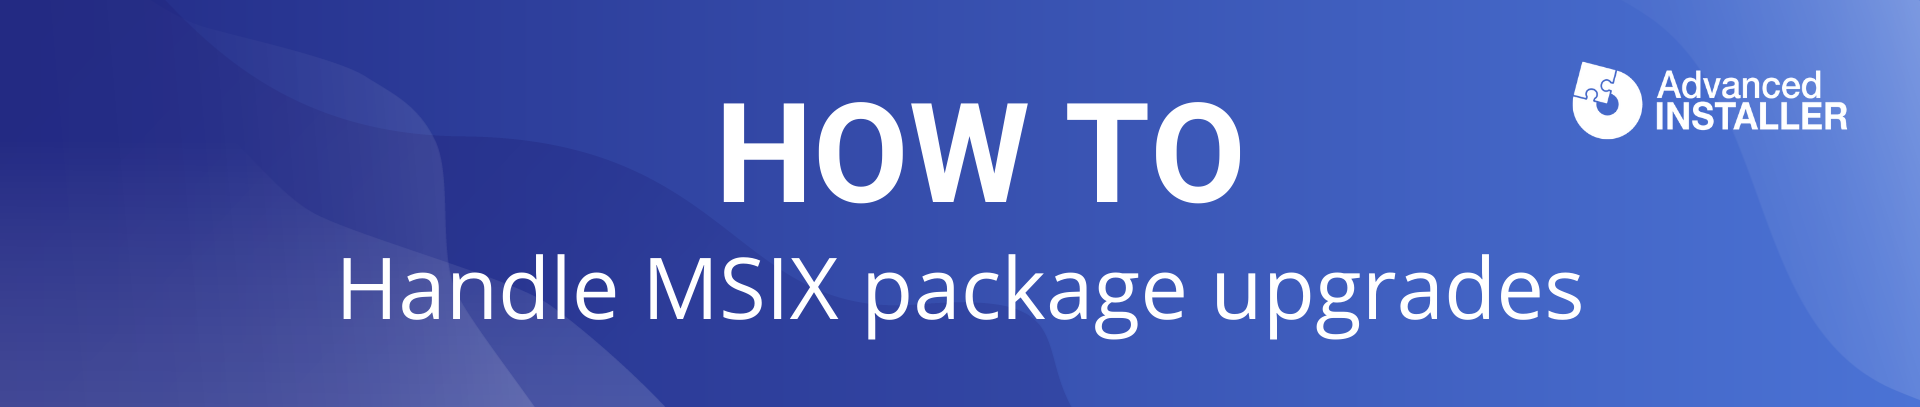 How to upgrade msix package